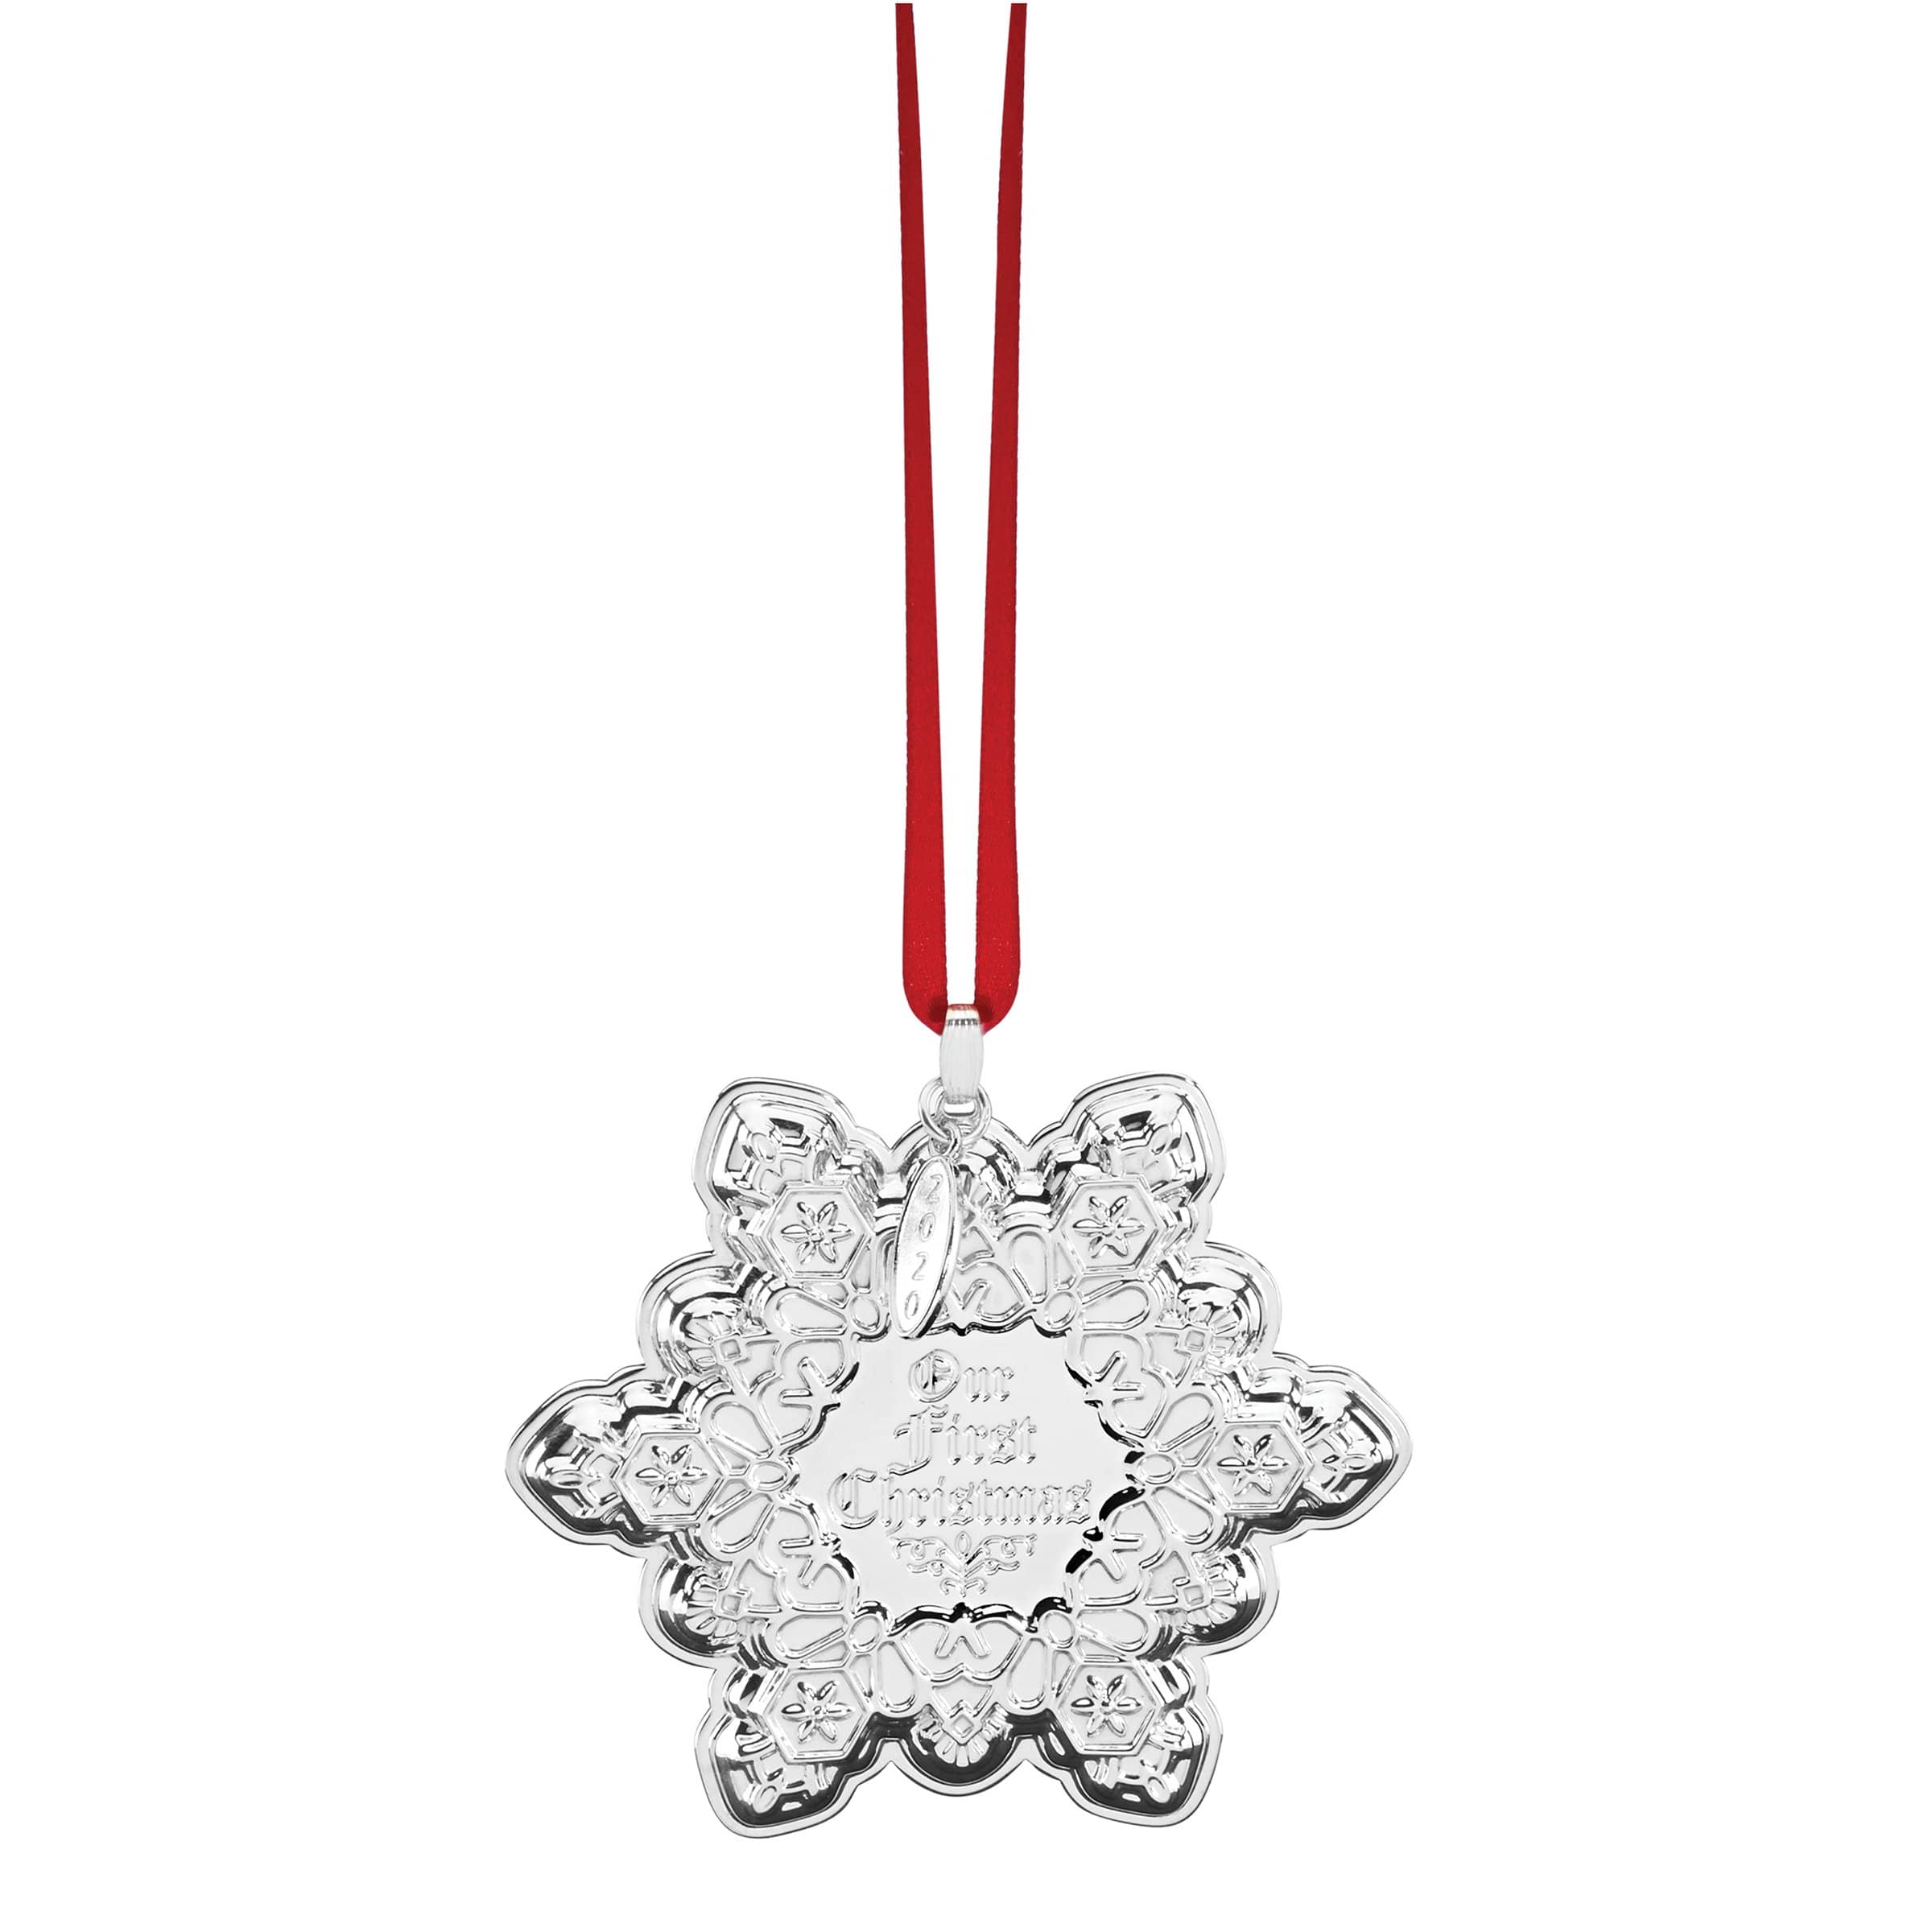 Celebrate your first holiday together with this sterling silver snowflake ornament featuring intricate designs, an "Our First Christmas" message and an exclusive 2020 hangtag to commemorate the year.